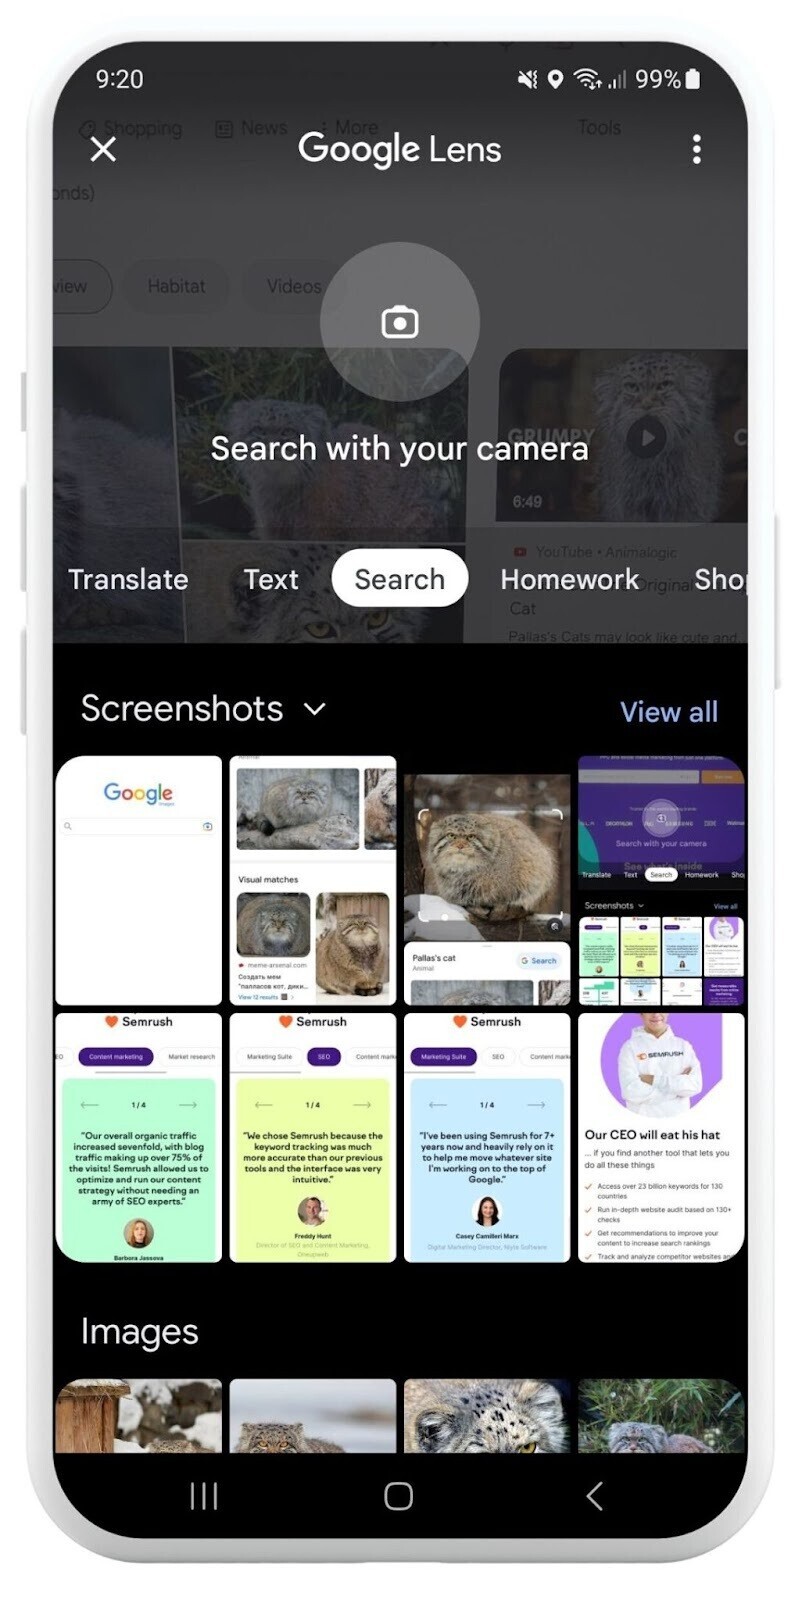 search with camera or upload your image